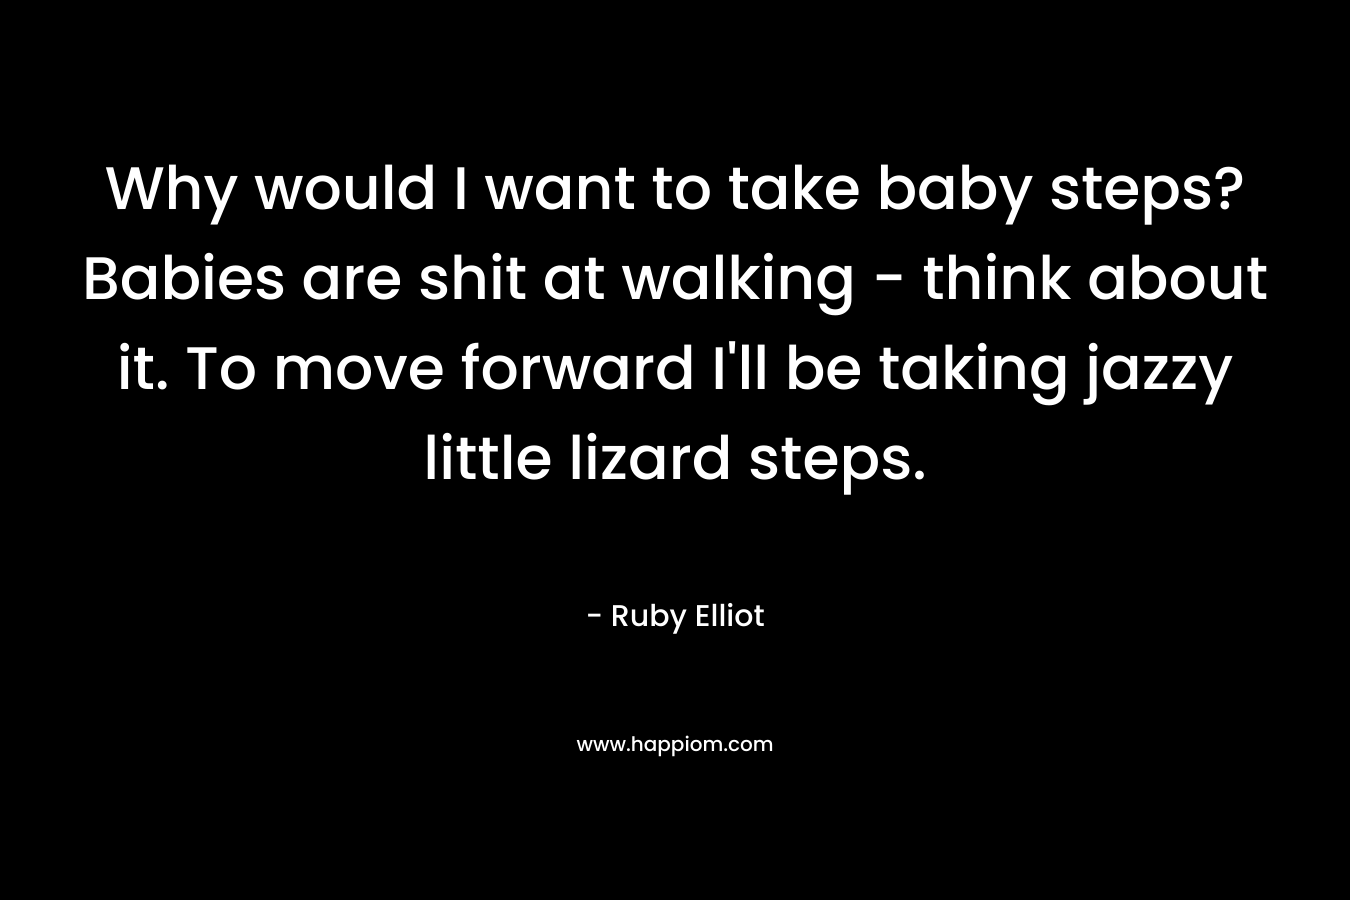 Why would I want to take baby steps? Babies are shit at walking - think about it. To move forward I'll be taking jazzy little lizard steps.